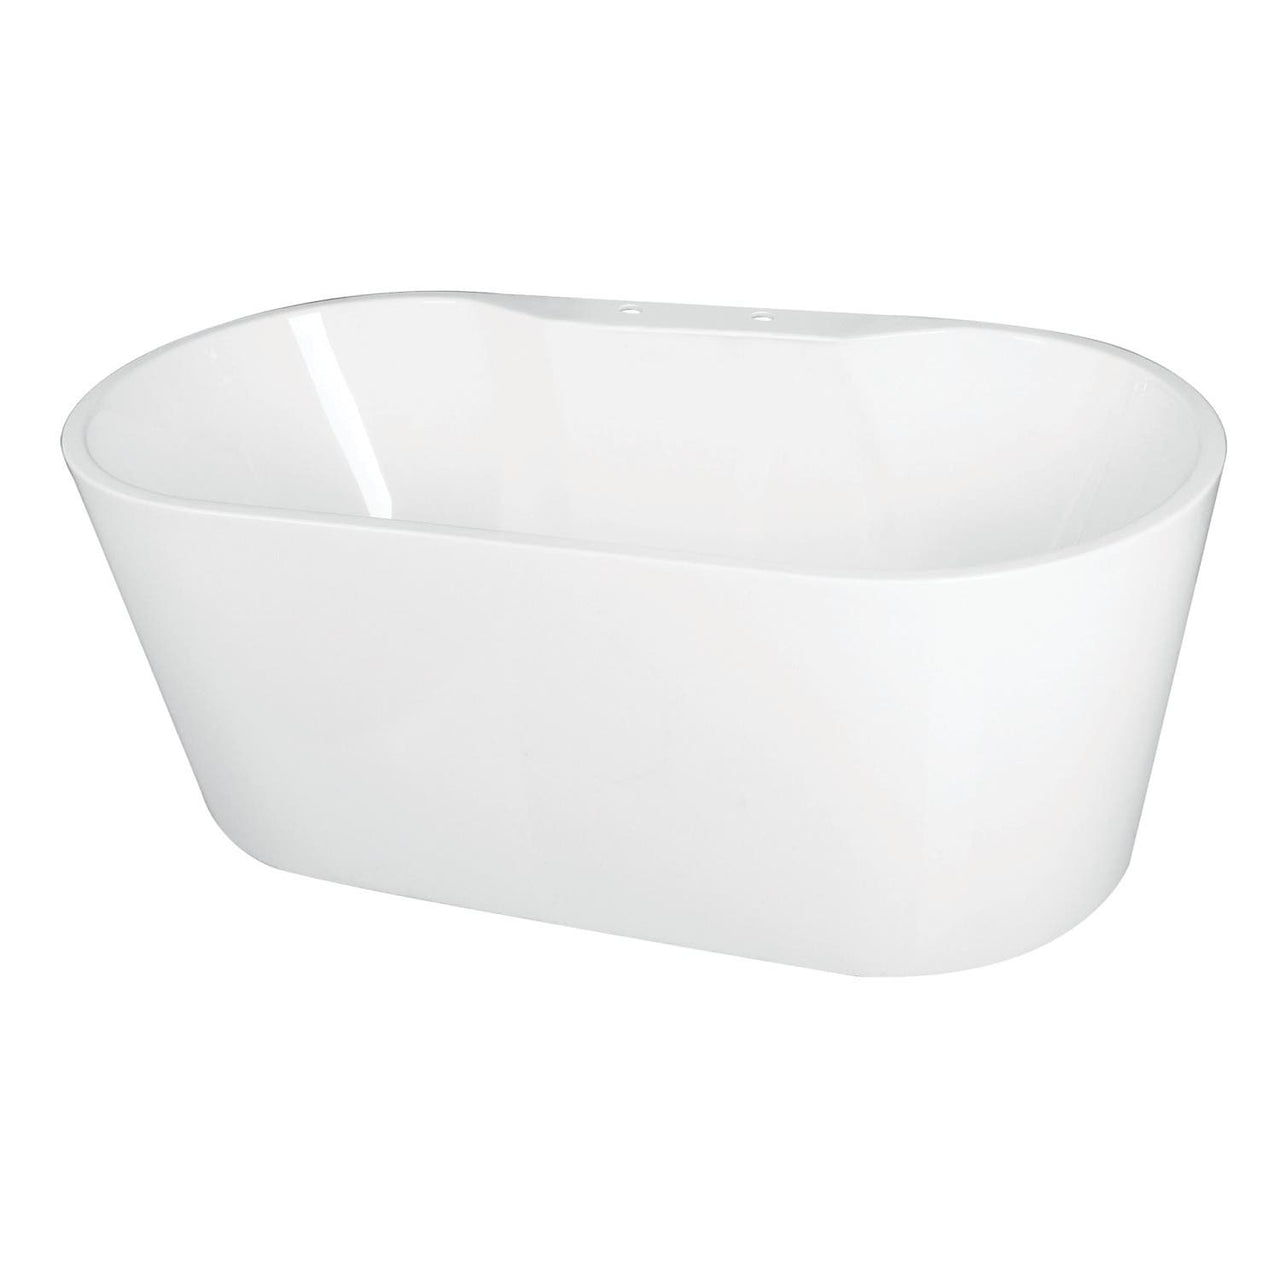 55-Inch Acrylic Freestanding Tub w/ Deck for Faucet - BNGBath